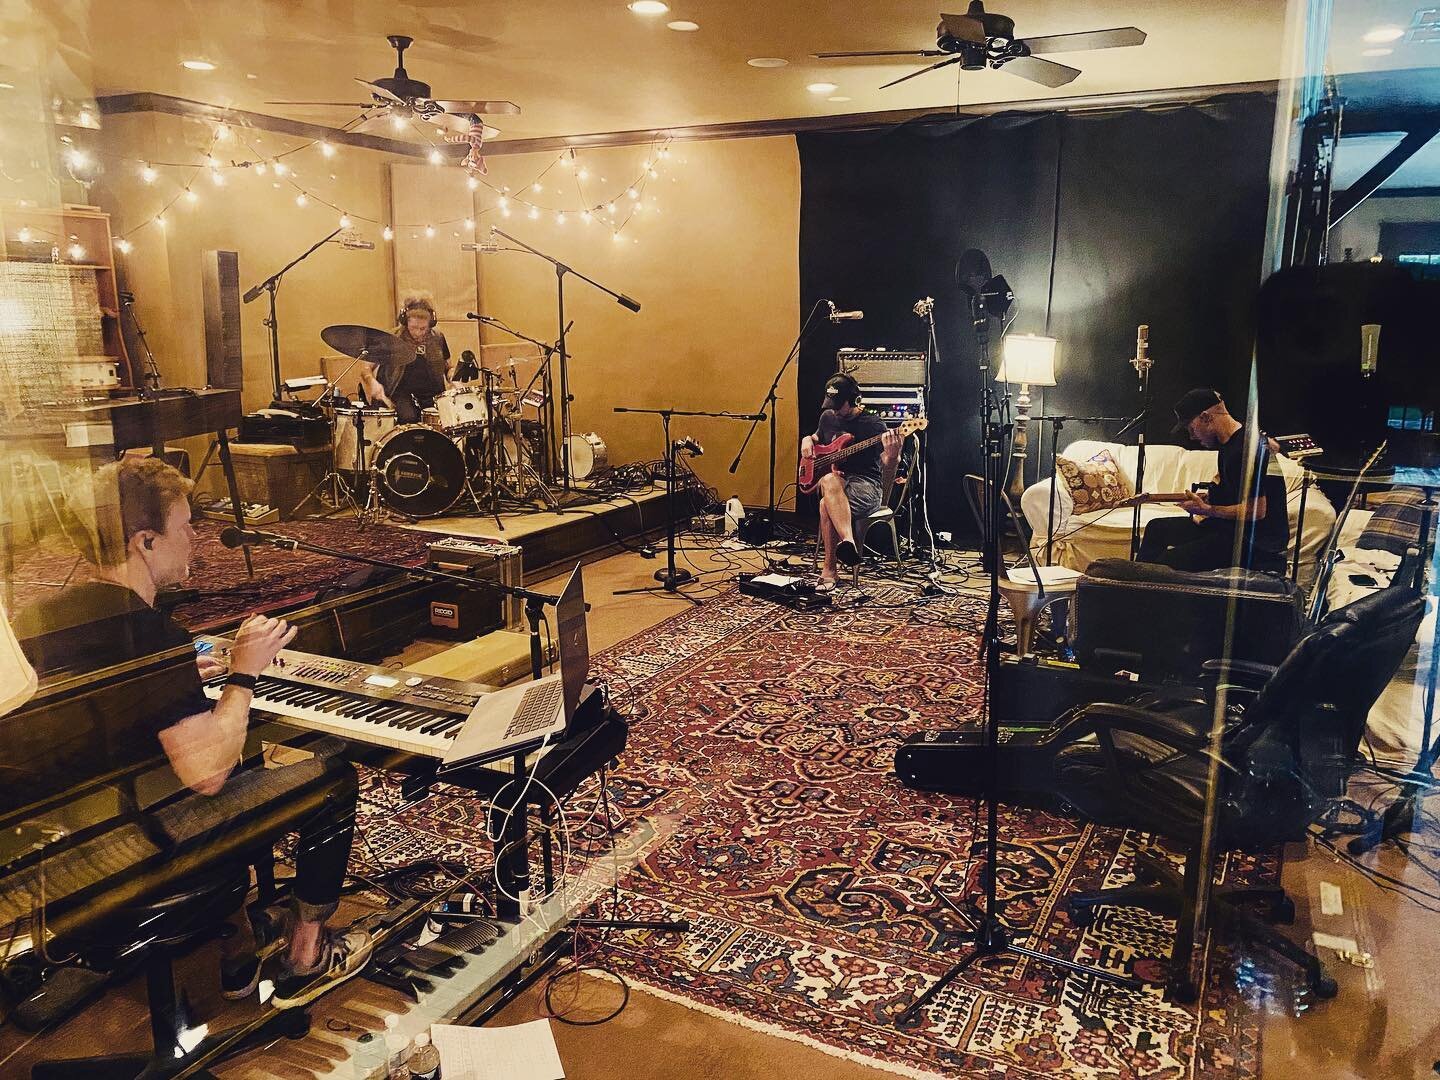 Can&rsquo;t tell you how refreshing it&rsquo;s been to be making music in the same room again. Lots of fun things coming very soon! @christomlin  @mr_gilder @timmyrjones @adanielcarson @edcashstudio